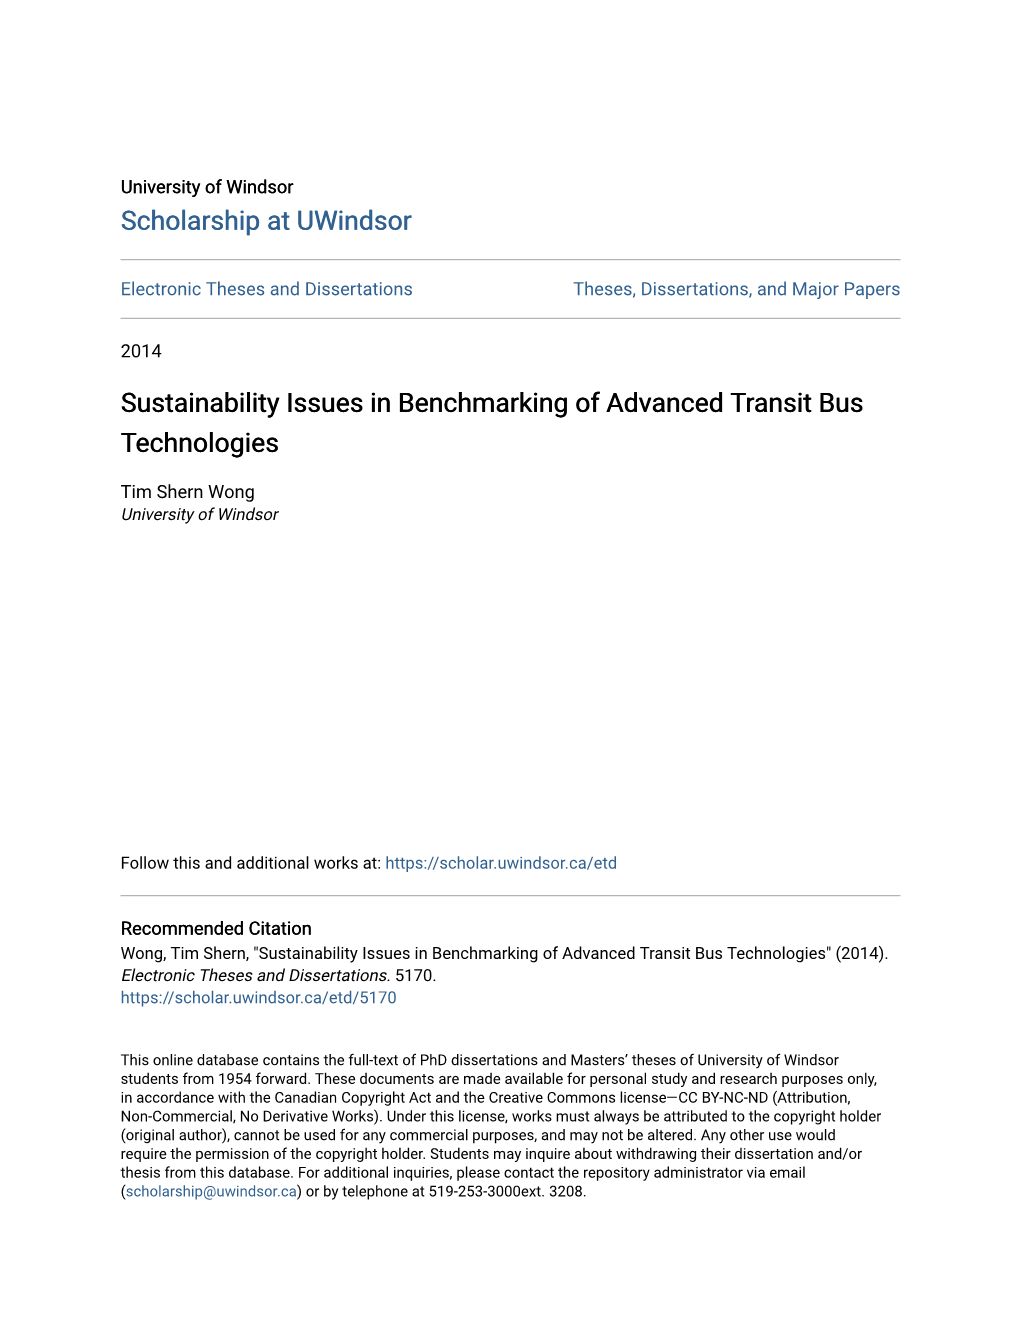 Sustainability Issues in Benchmarking of Advanced Transit Bus Technologies